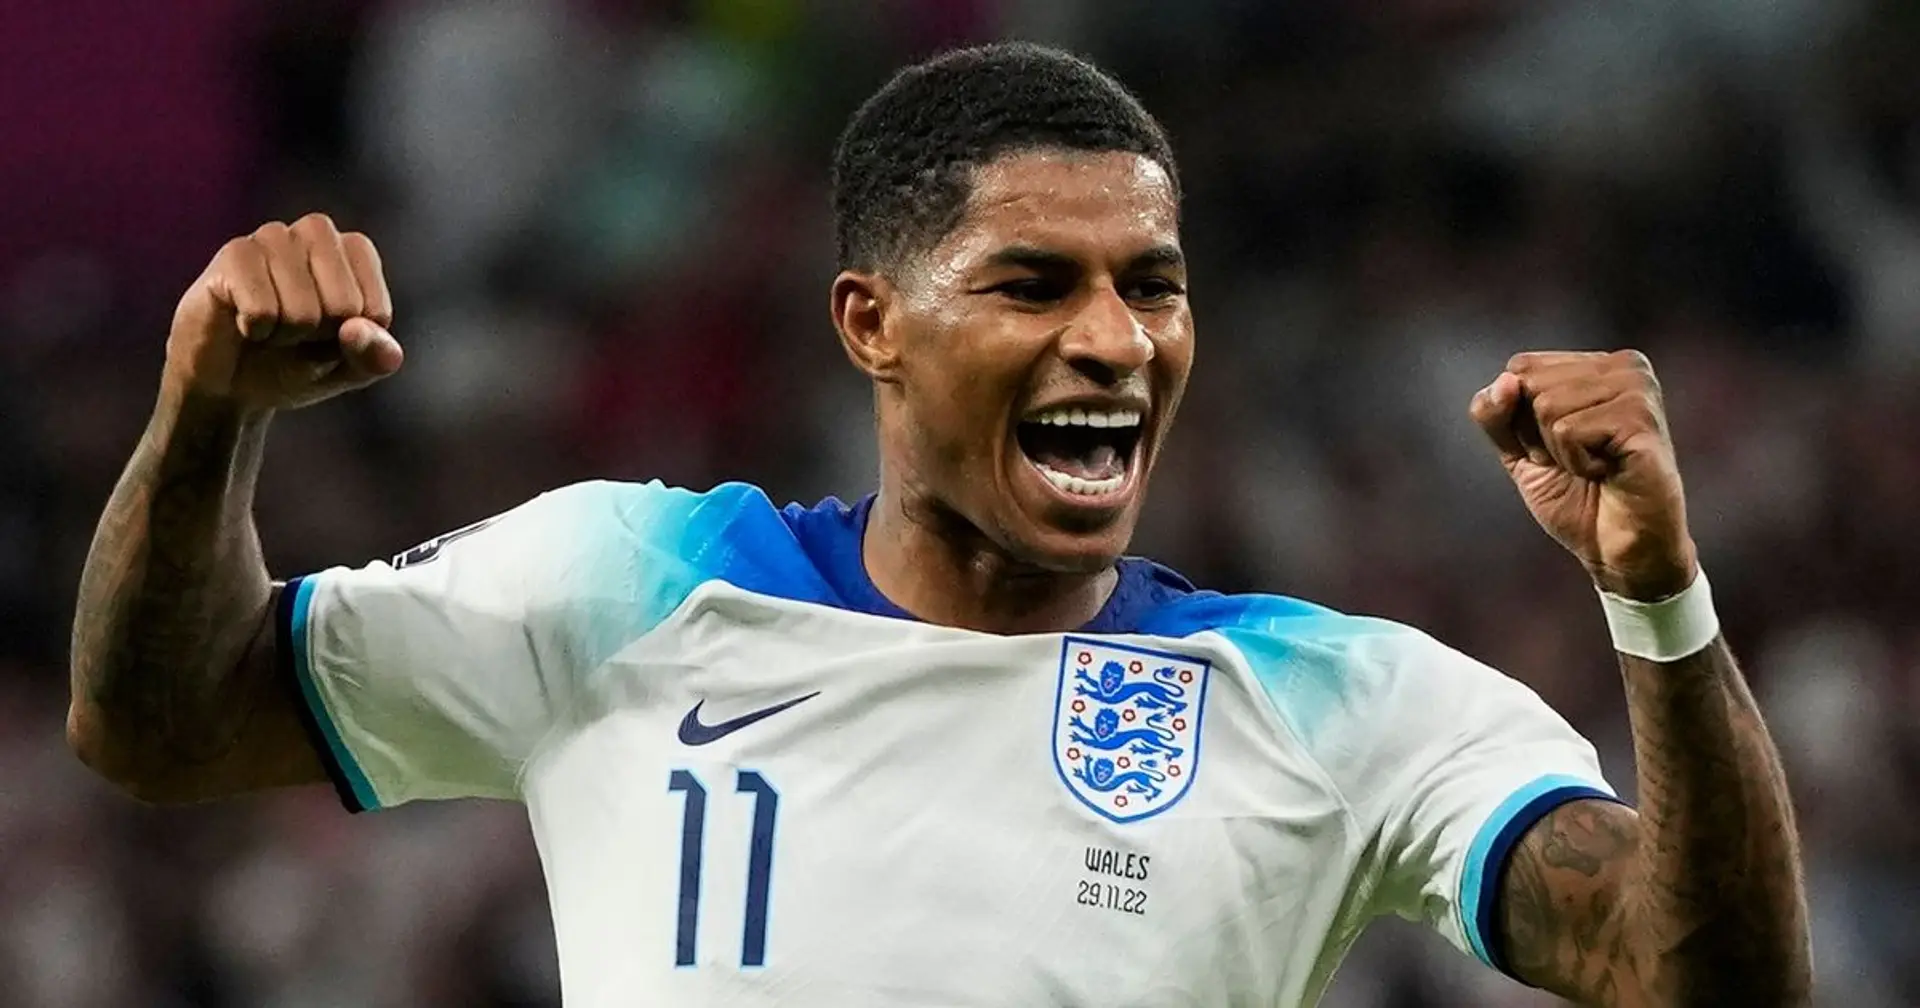 'The best is yet to come!': Man United fans react to Marcus Rashford's England heroics